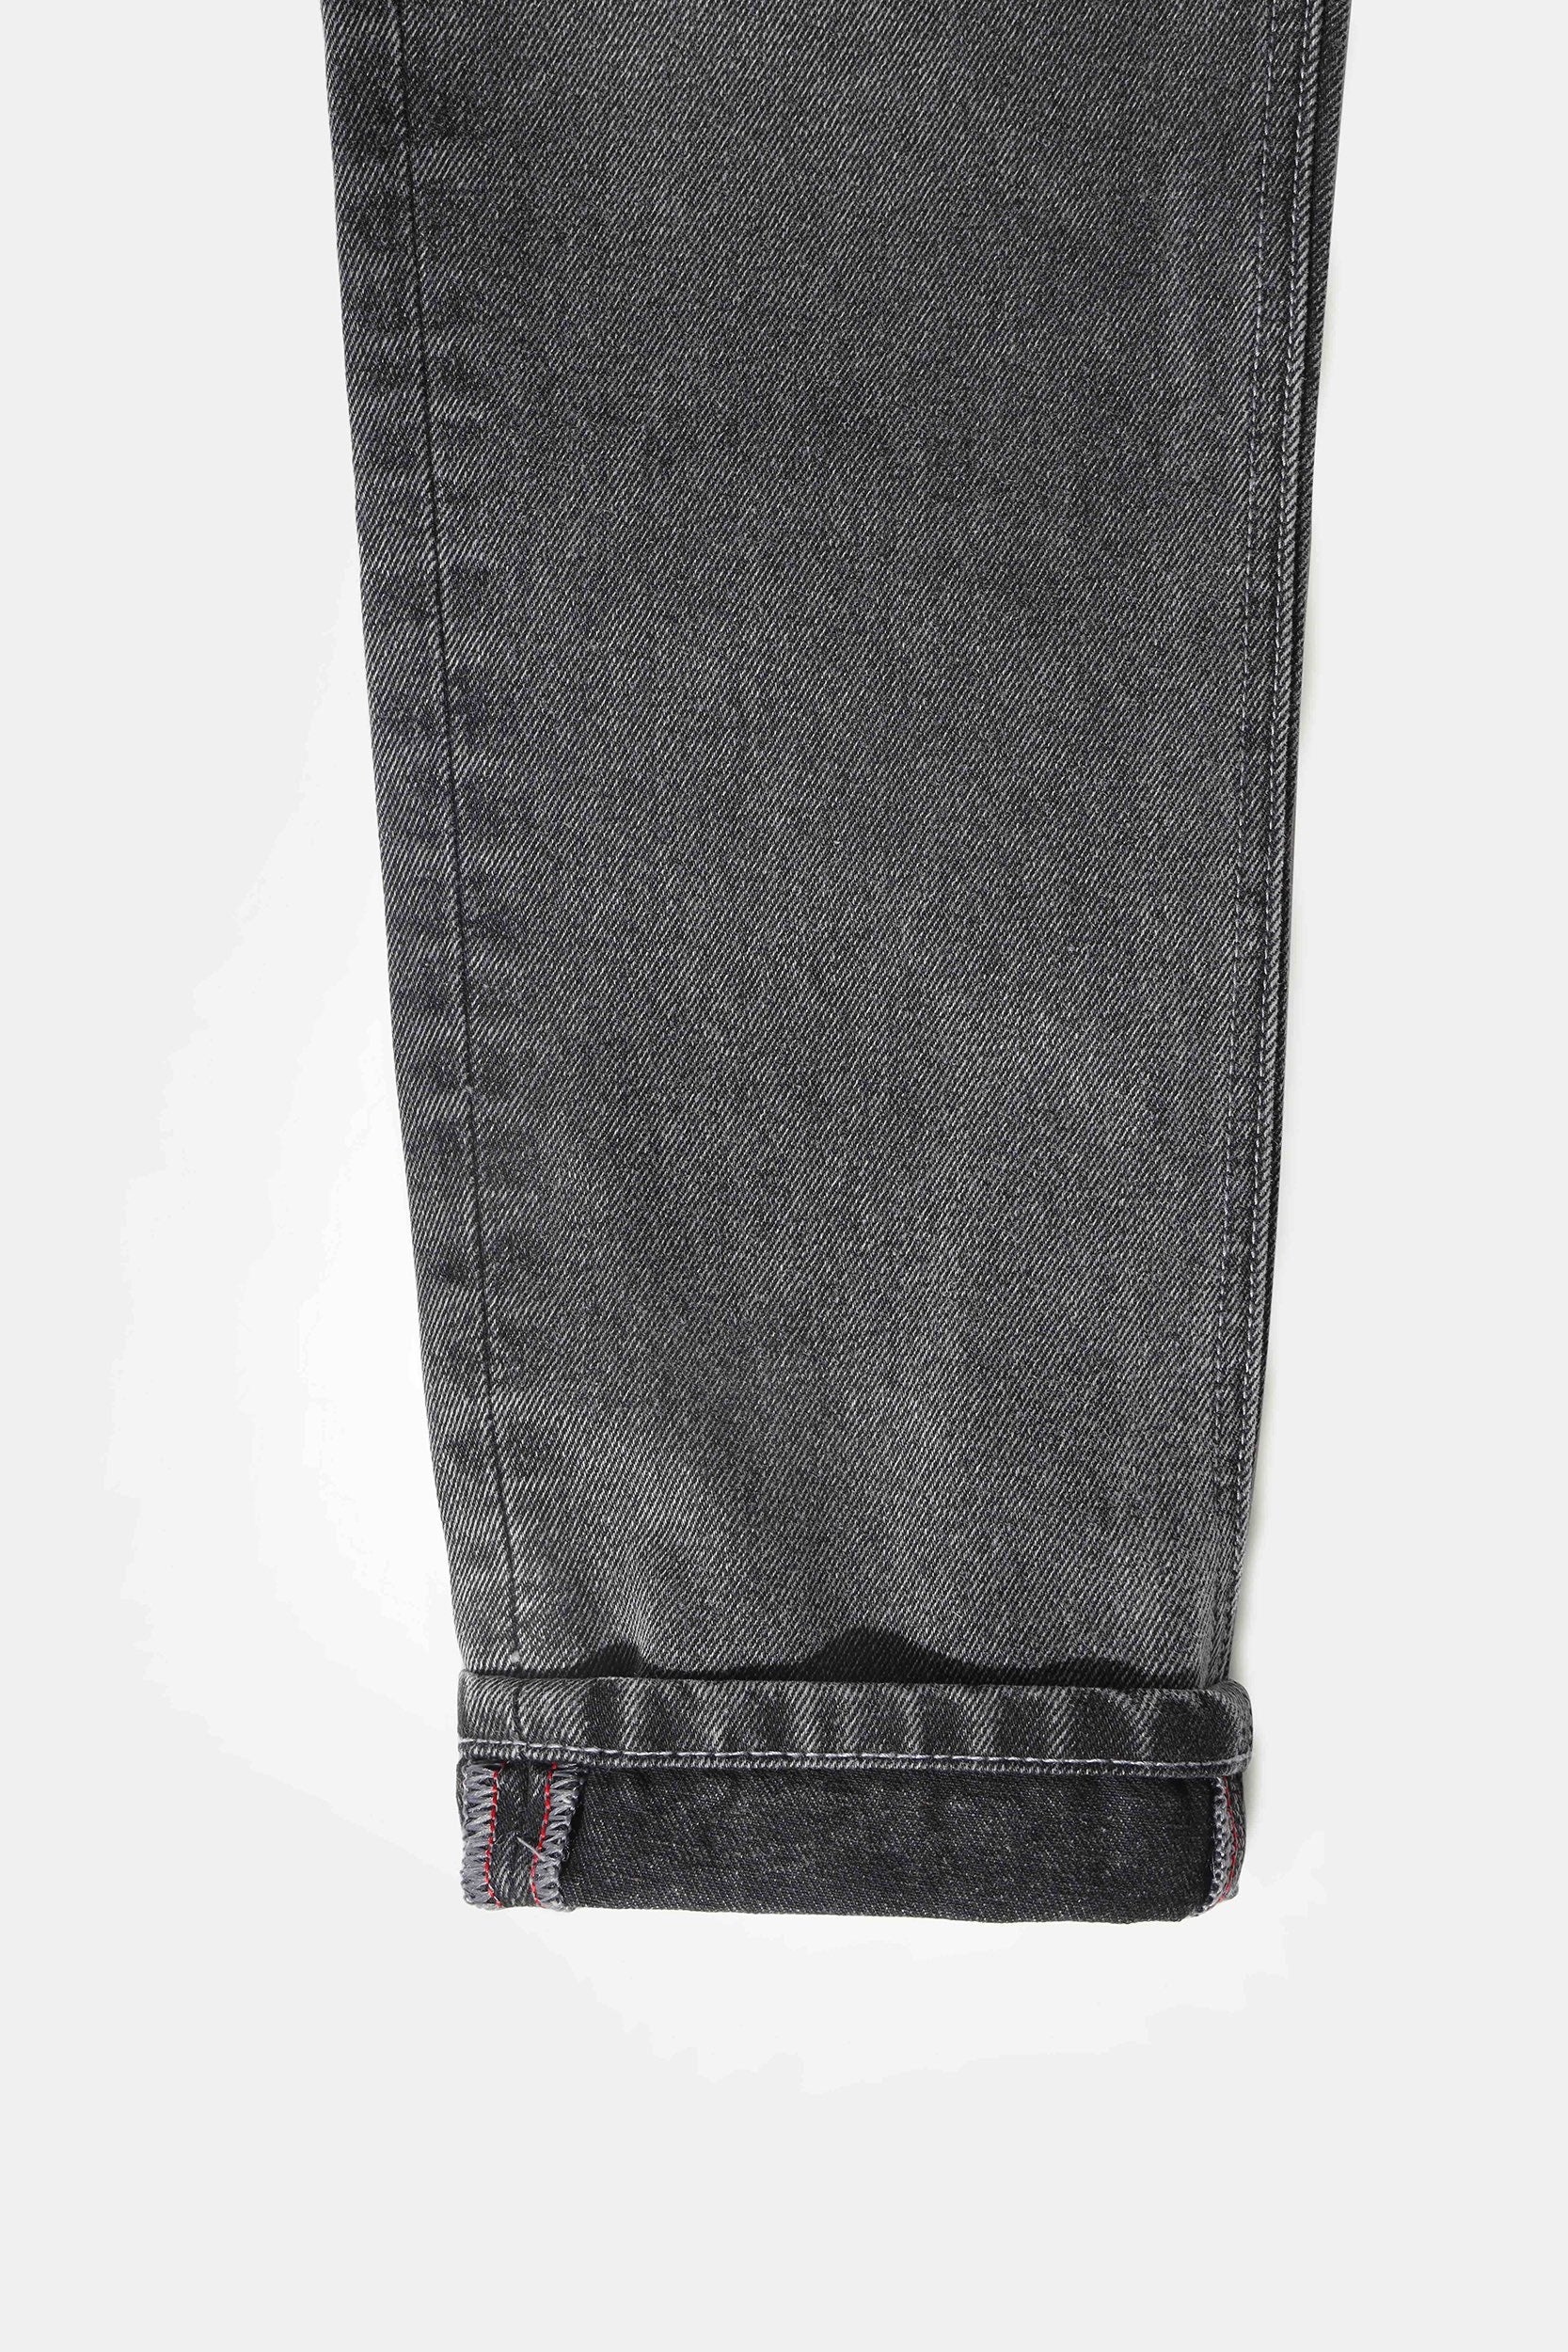 Buy Red Tape Men's Charcoal Grey Solid Cotton Spandex Skinny Jeans Online  at Best Prices in India - JioMart.